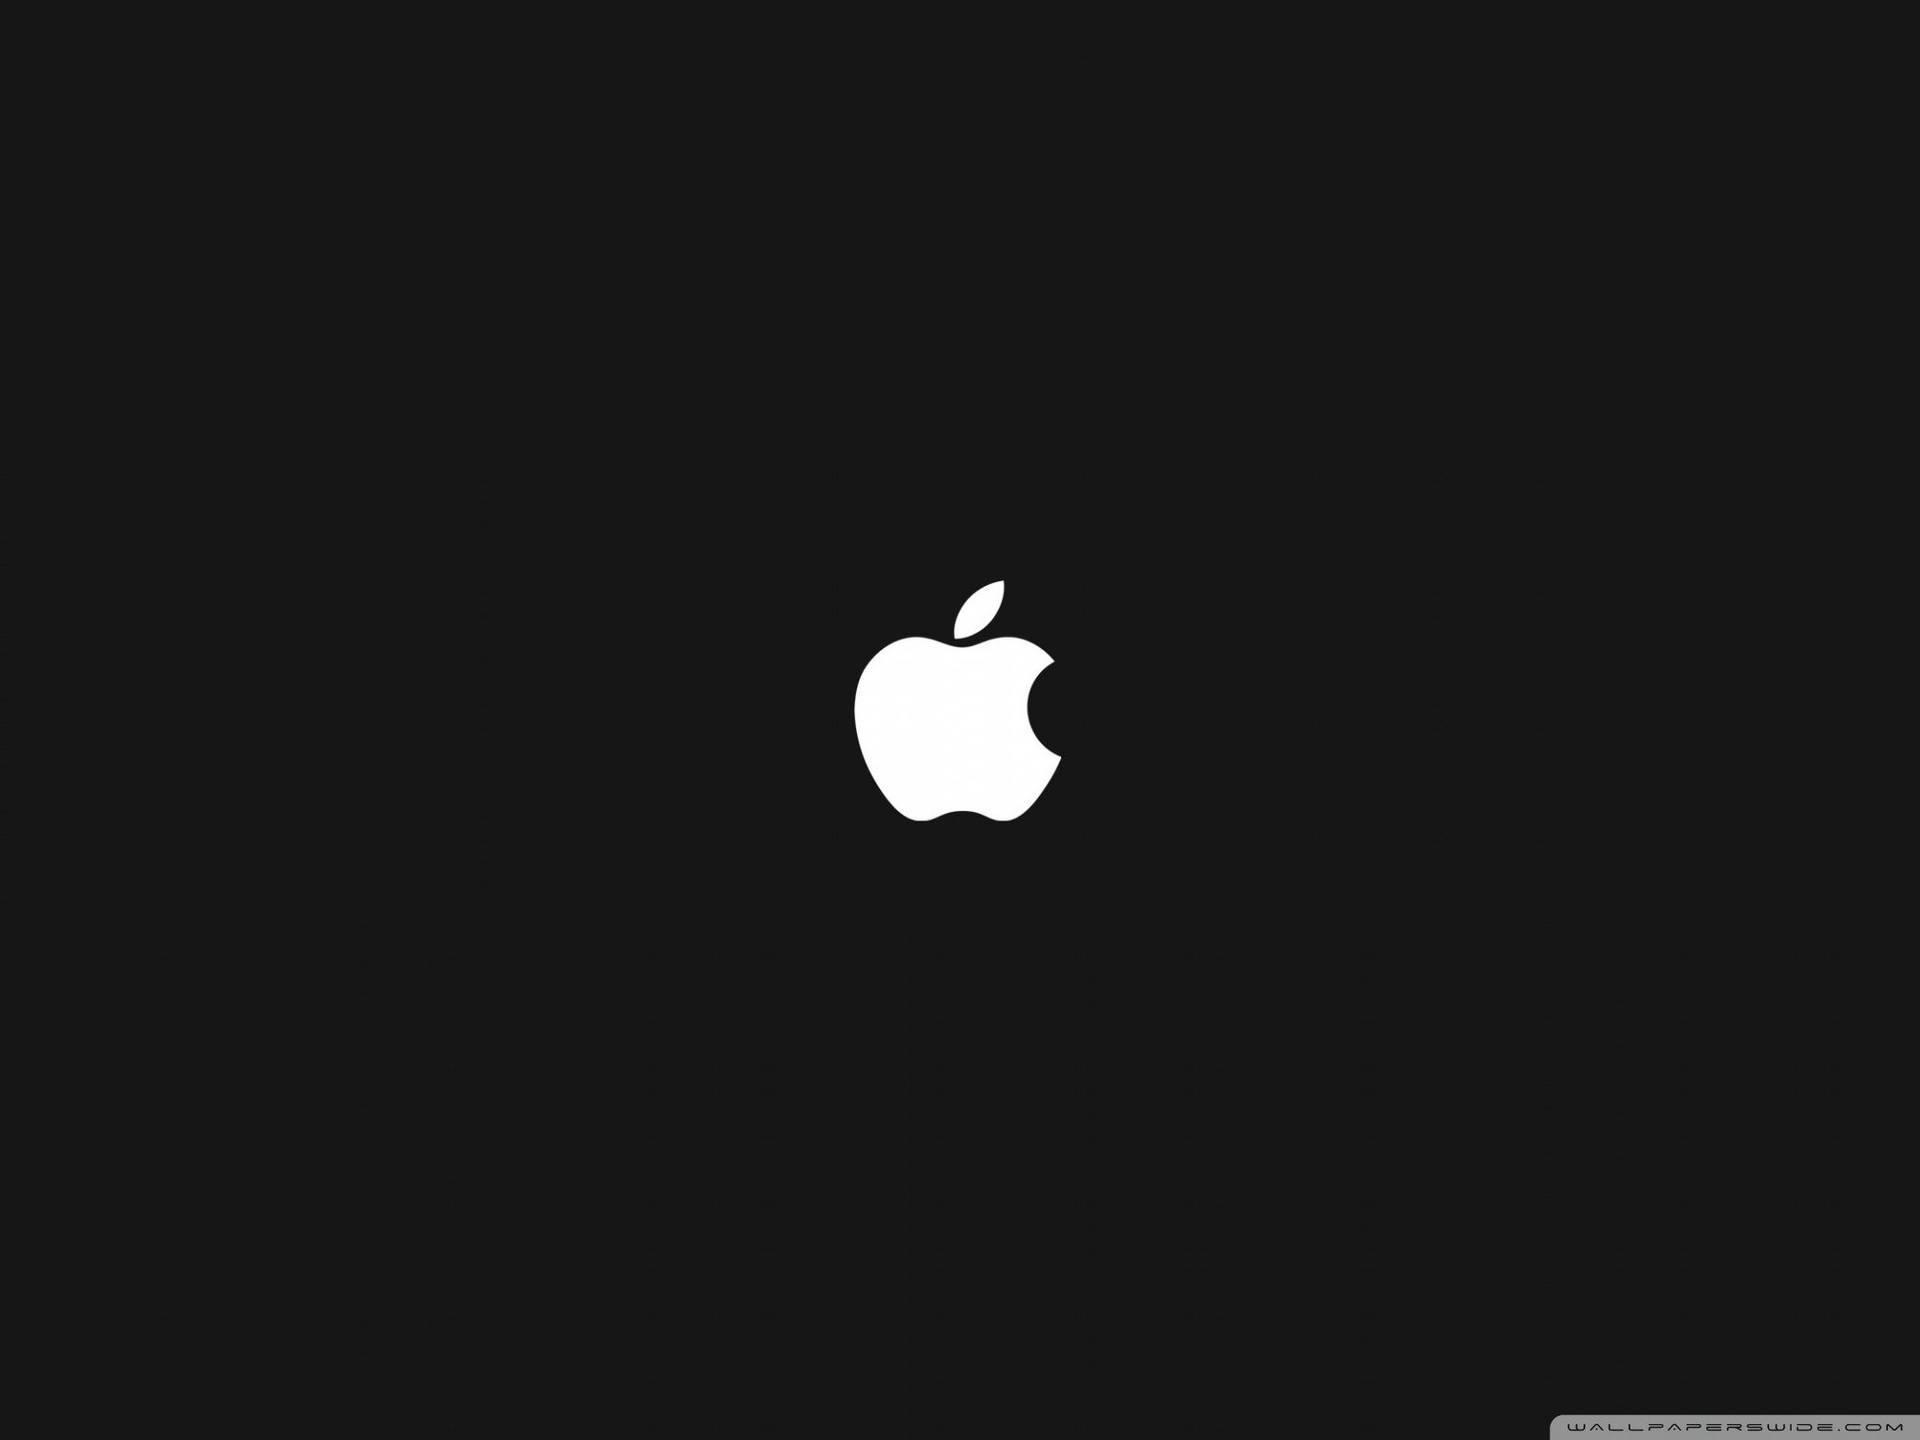 The classic Apple logo in white on a black background Wallpaper